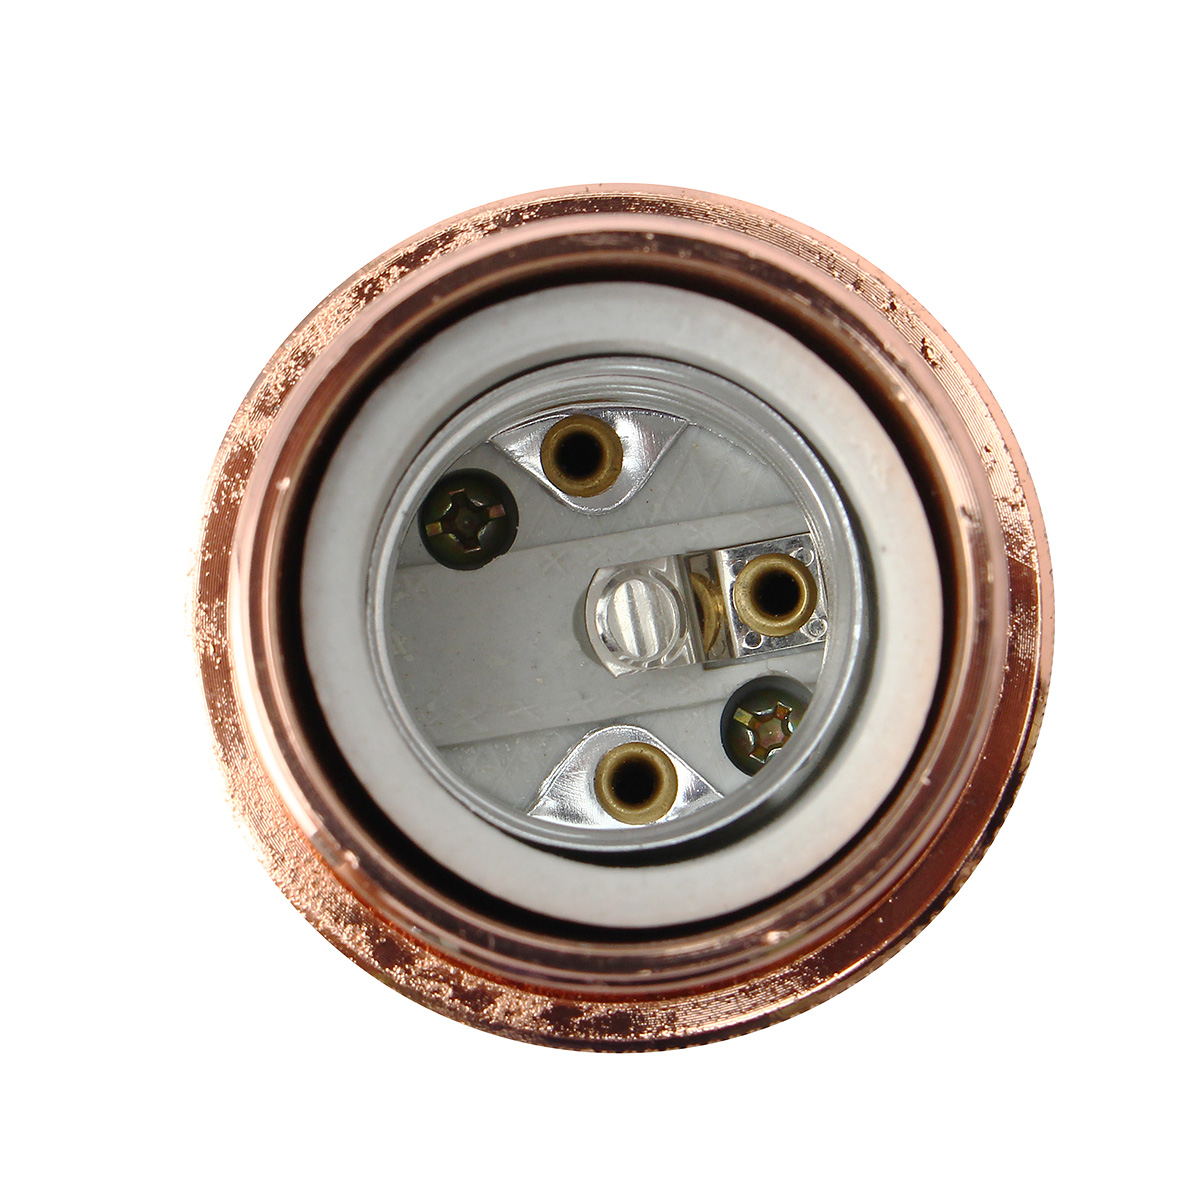 KINGSO-110V-220V-600W-Vintage-Lamp-Holder-Ceiling-Canopy-and-Copper-Socket-with-2M-Wire-1894180-13